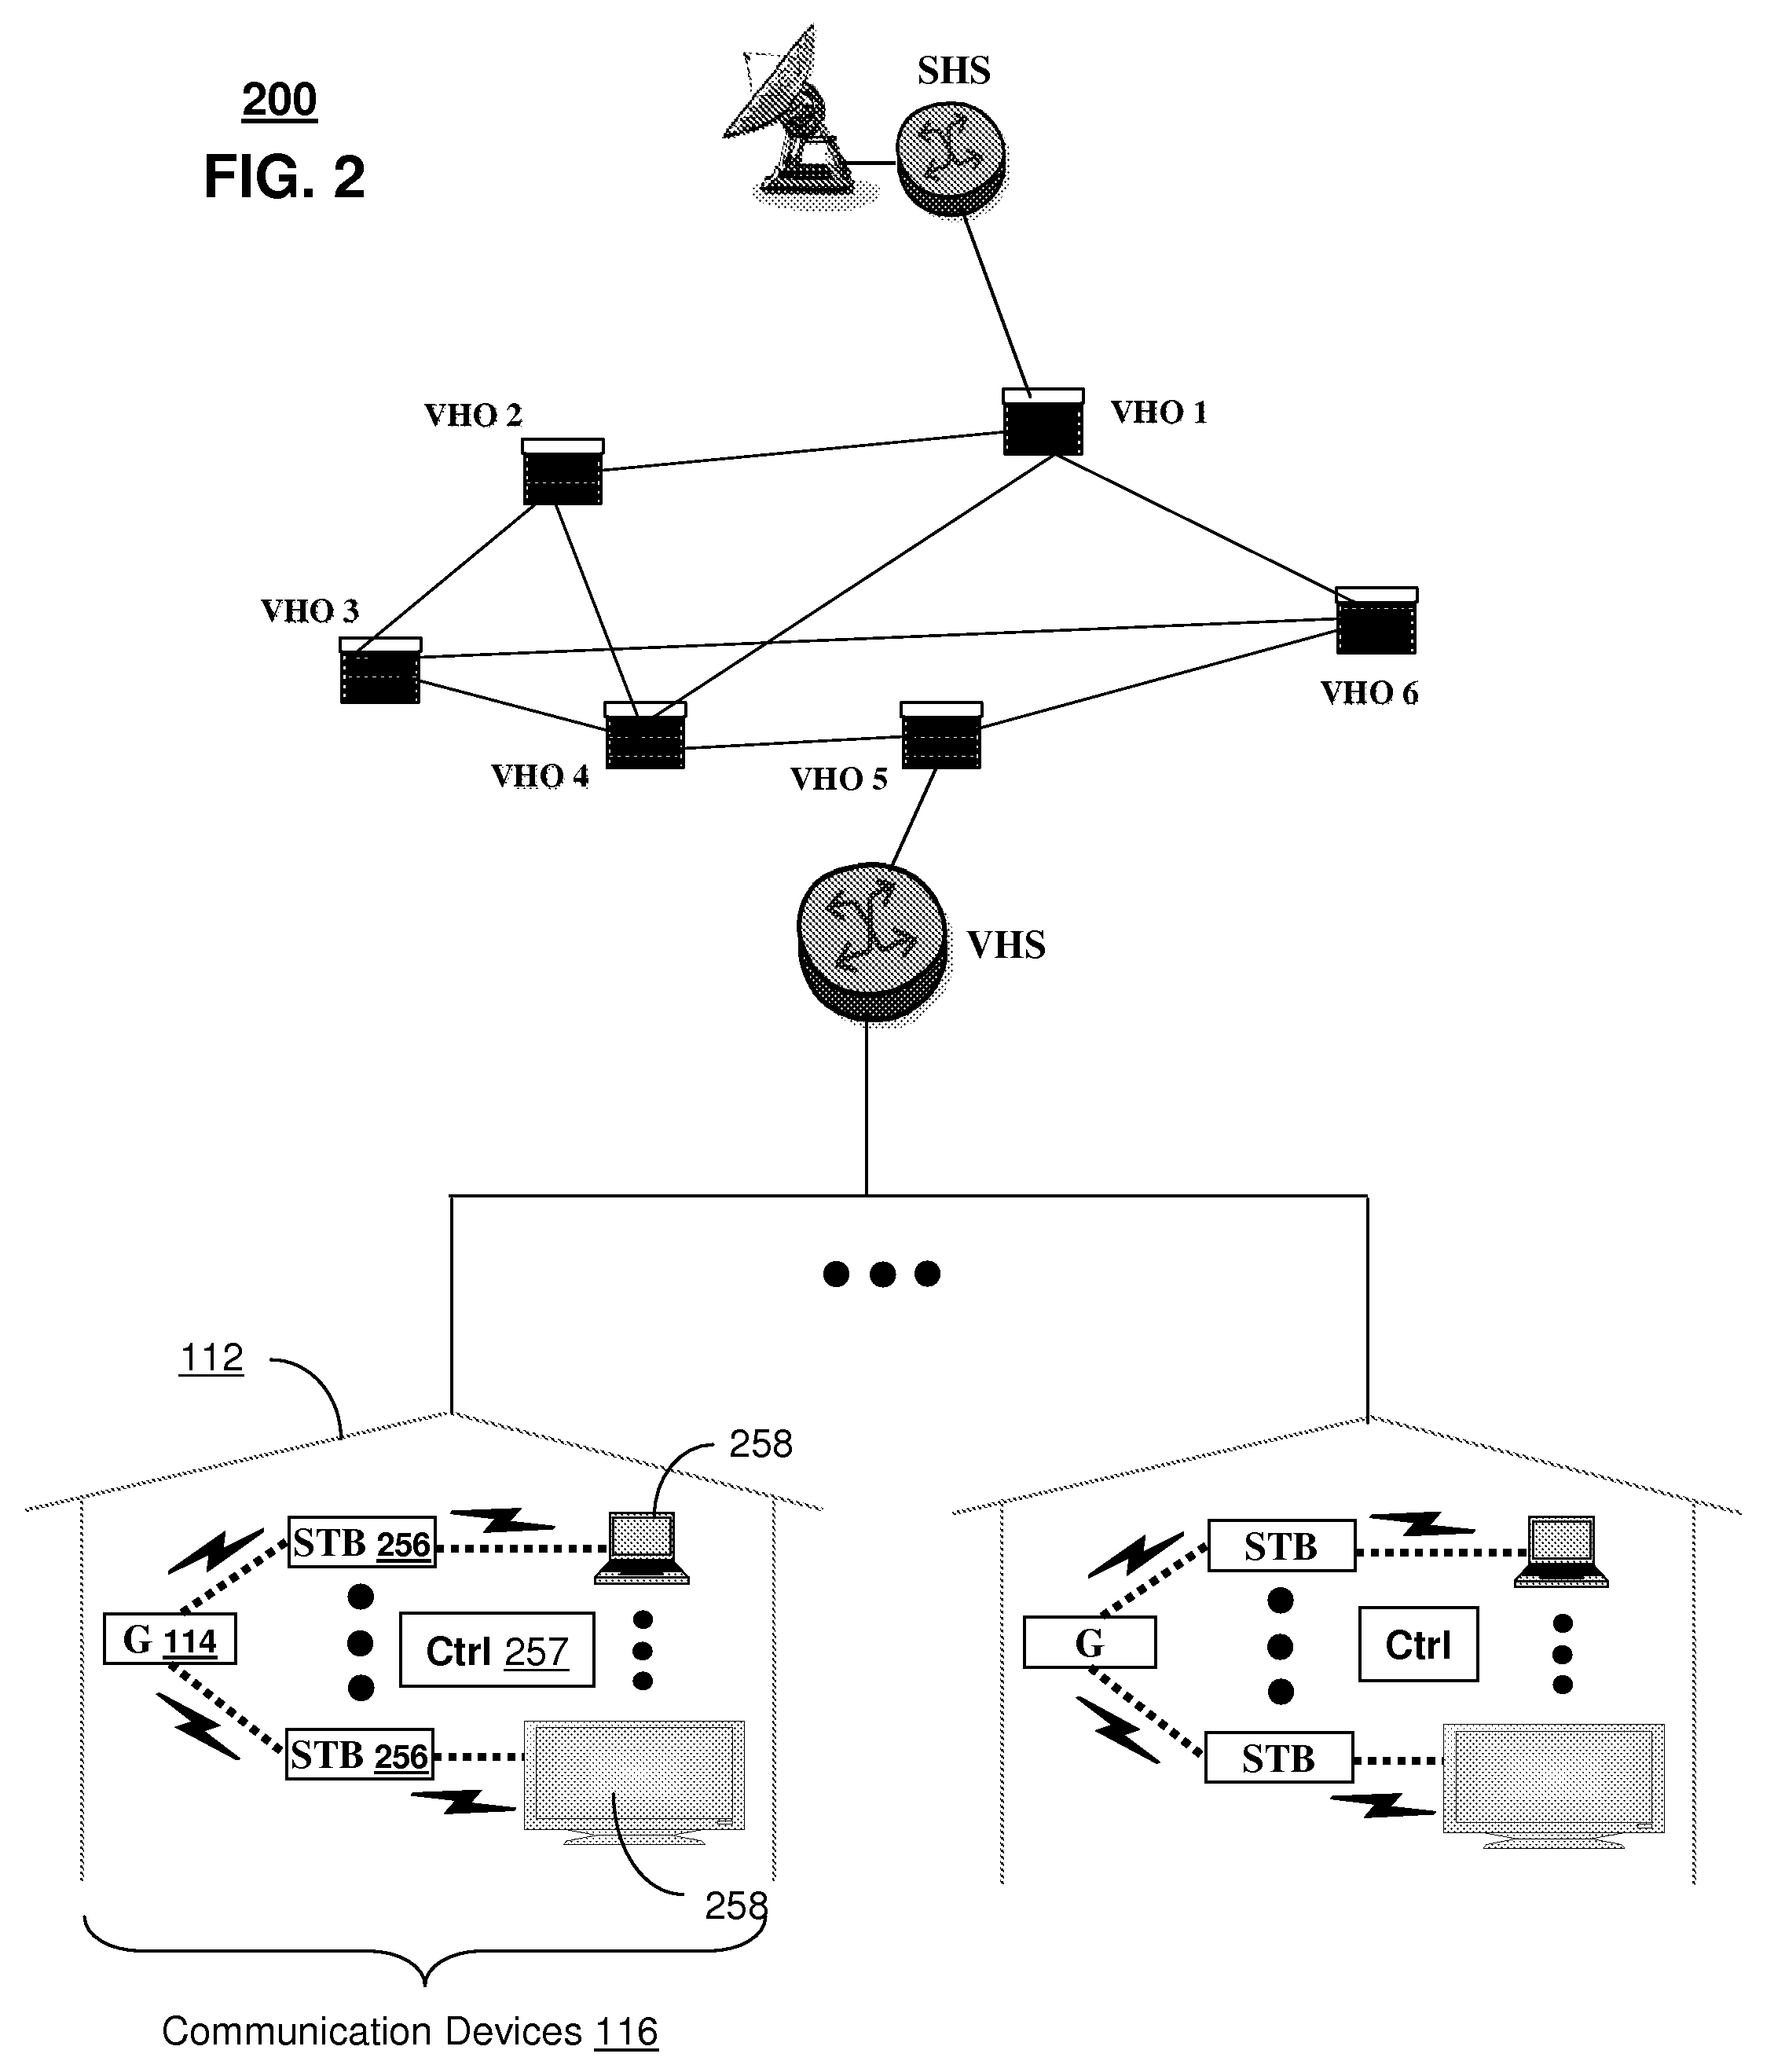 Method and apparatus for transmitting emergency messages